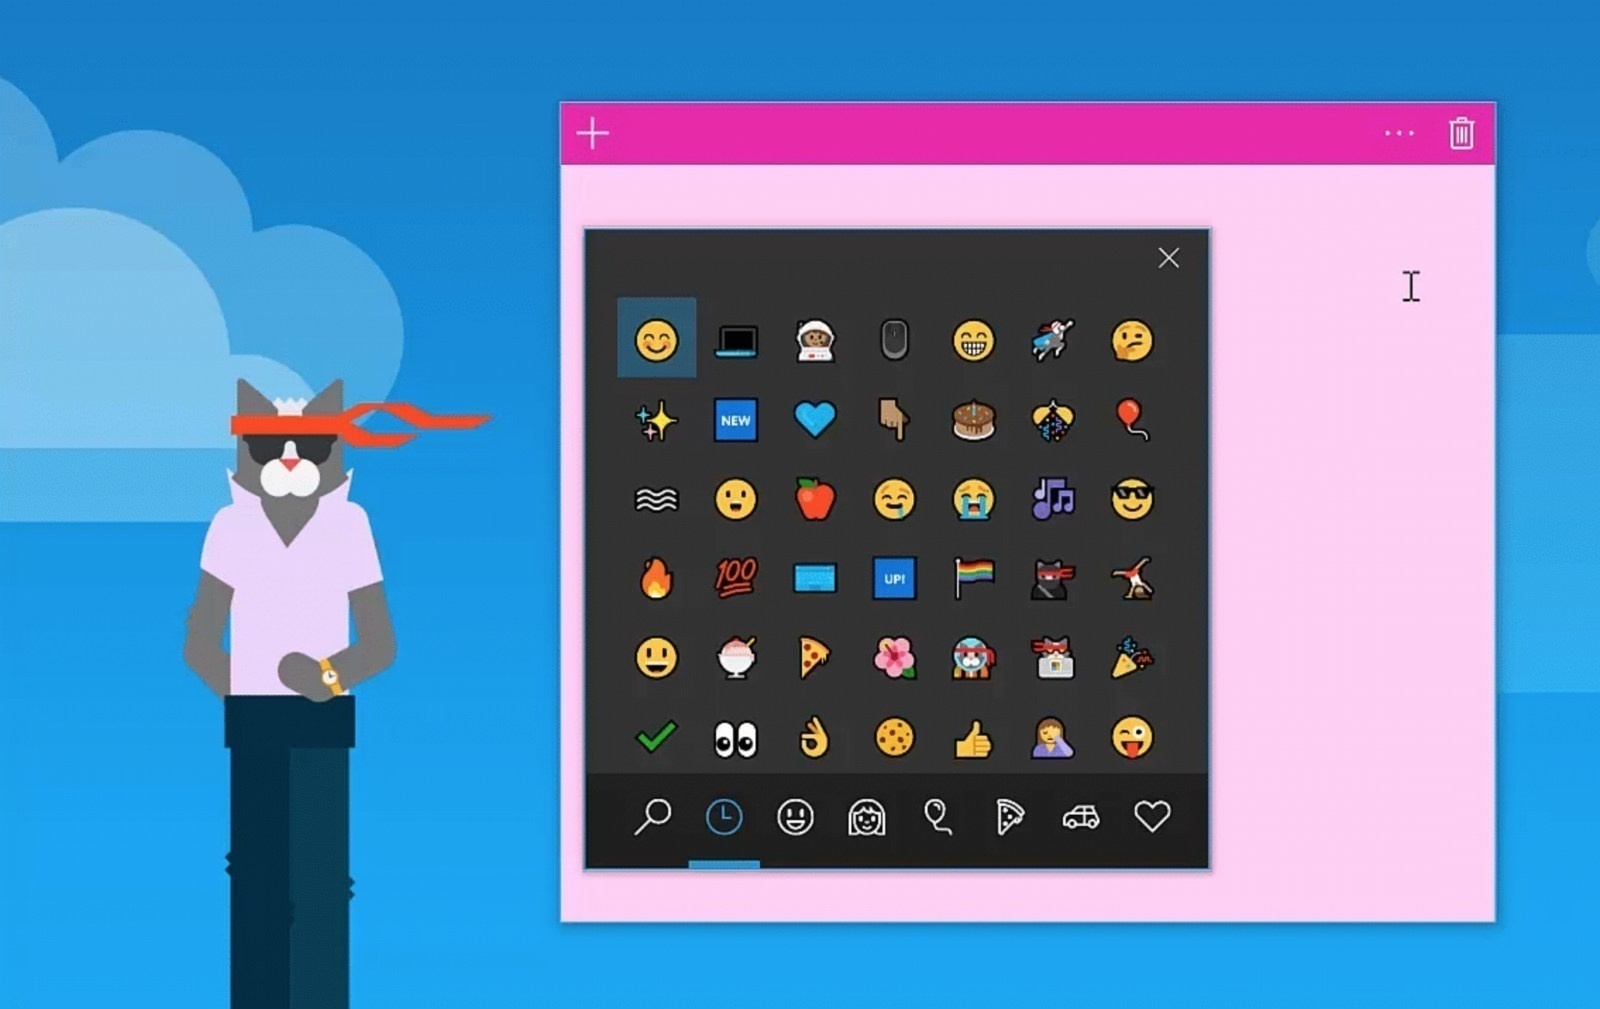 Windows 10 keyboard offers emoji suggestions in latest preview